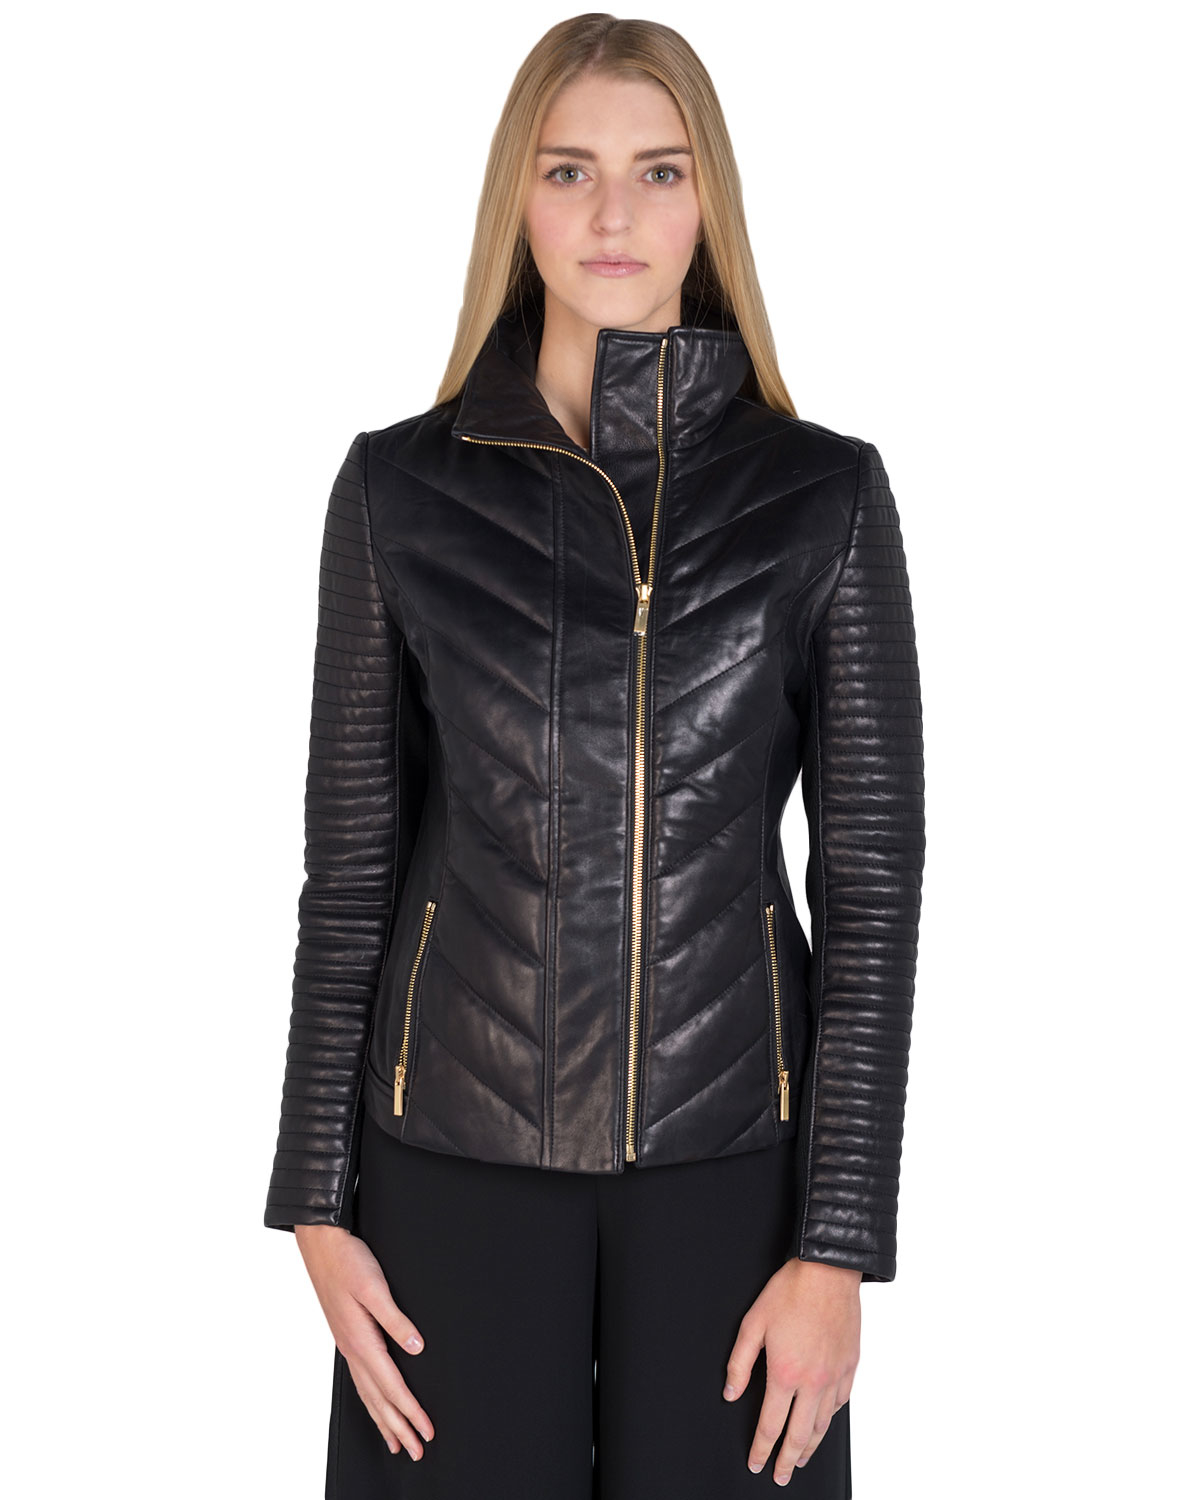 Badgley mischka Dion Classic Fitted Leather Jacket in Black | Lyst